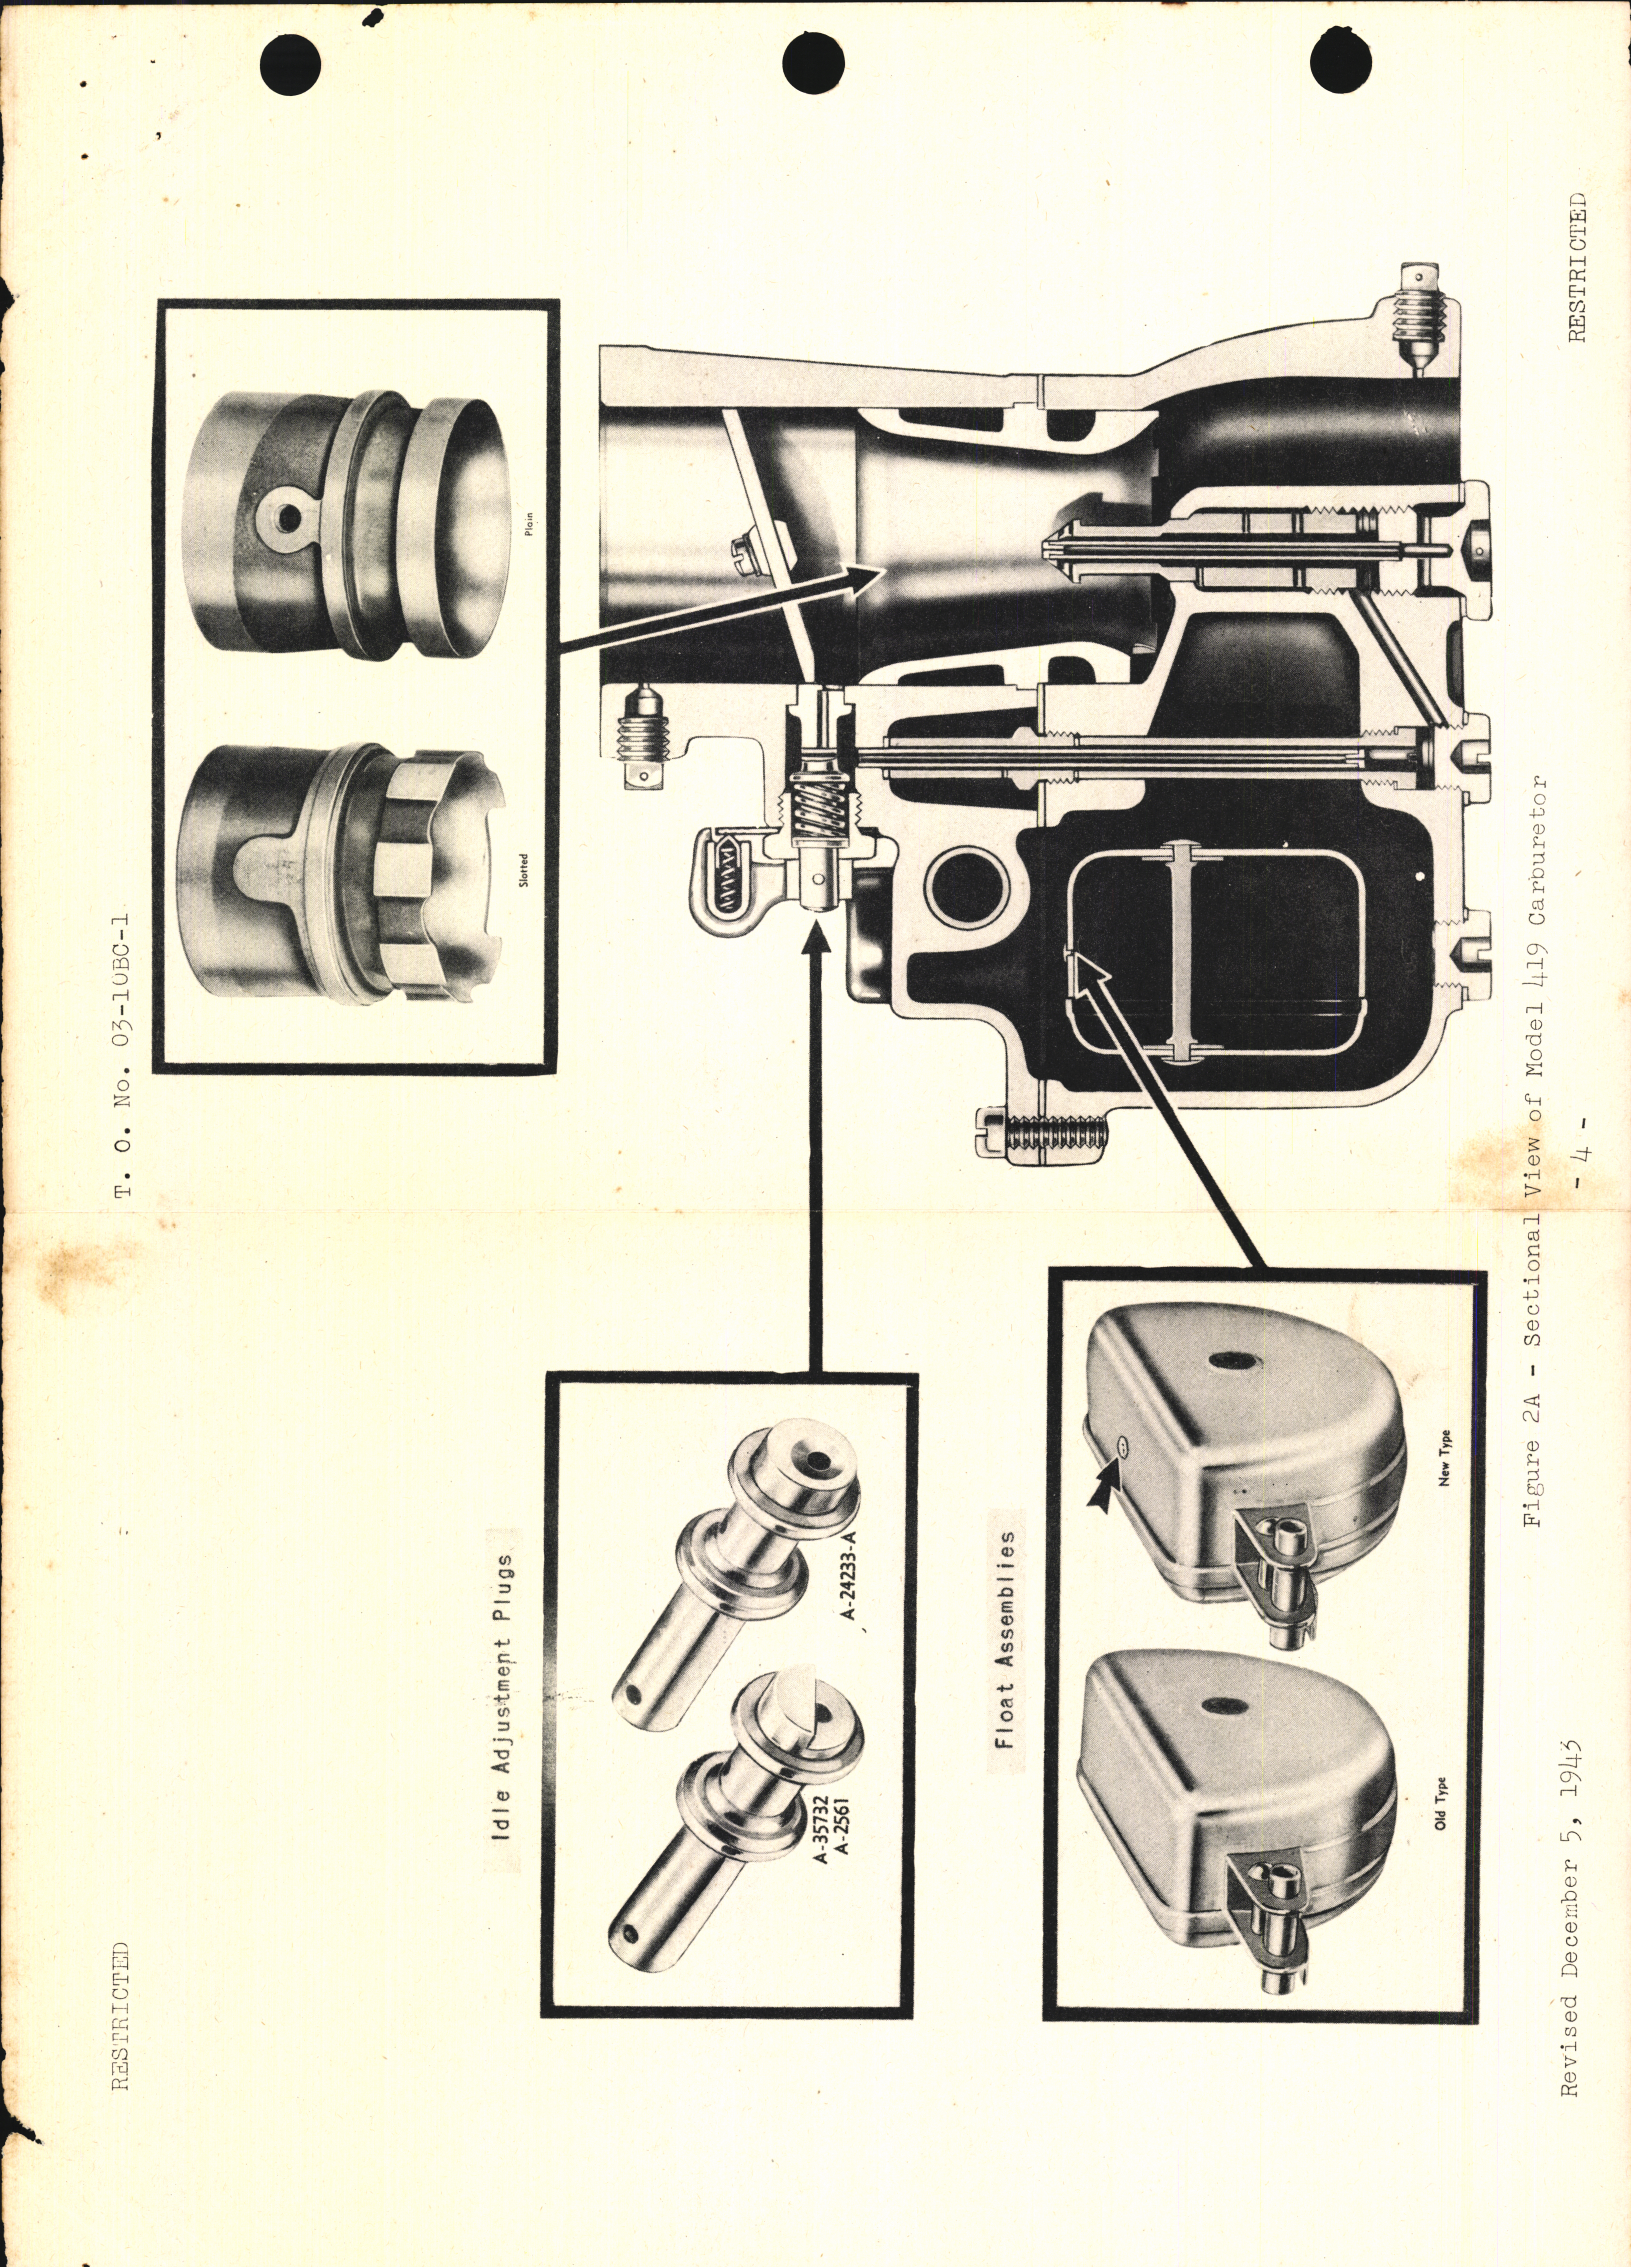 Sample page 8 from AirCorps Library document: Handbook of Instructions with Parts Catalog for 419 Series Aircraft Carburetors